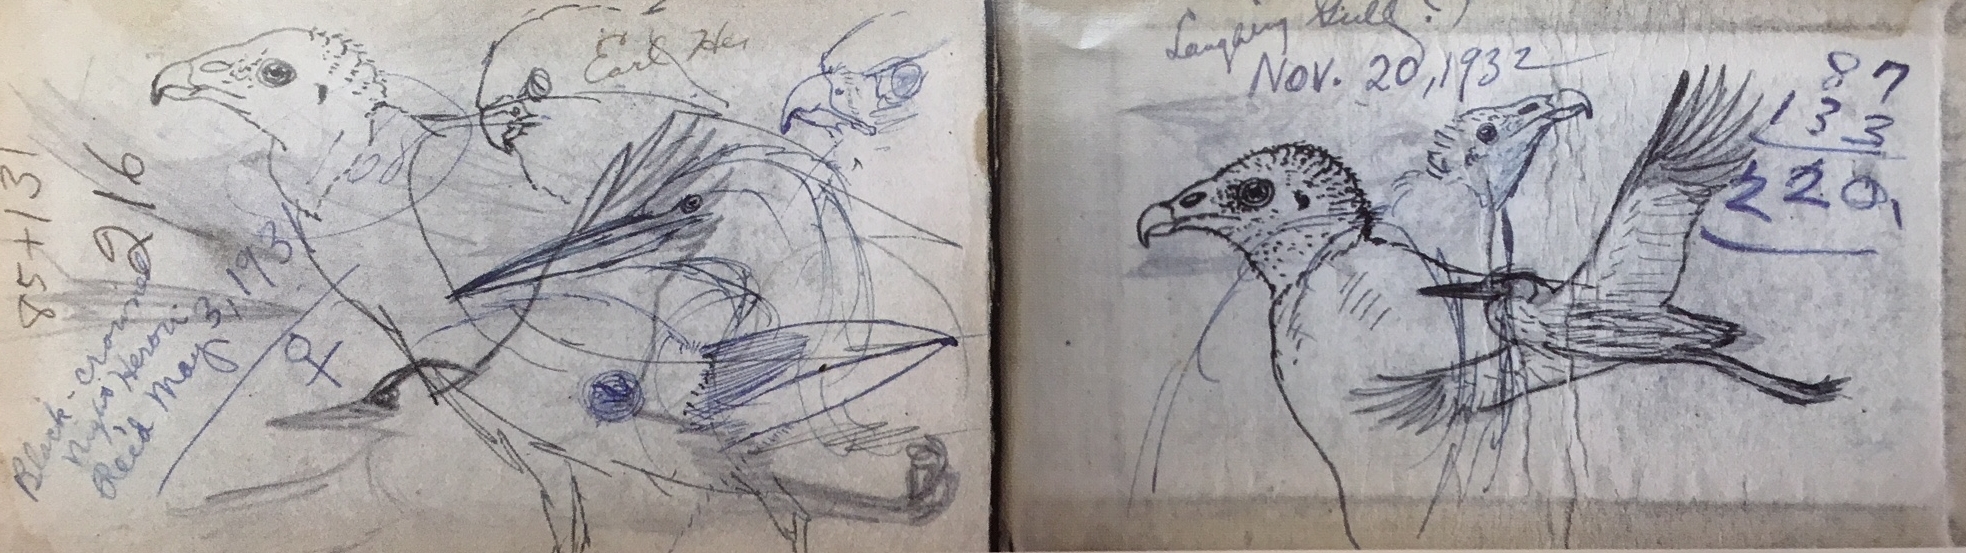 Earl Henry's sketches. (Courtesy of Earl Henry Jr.)